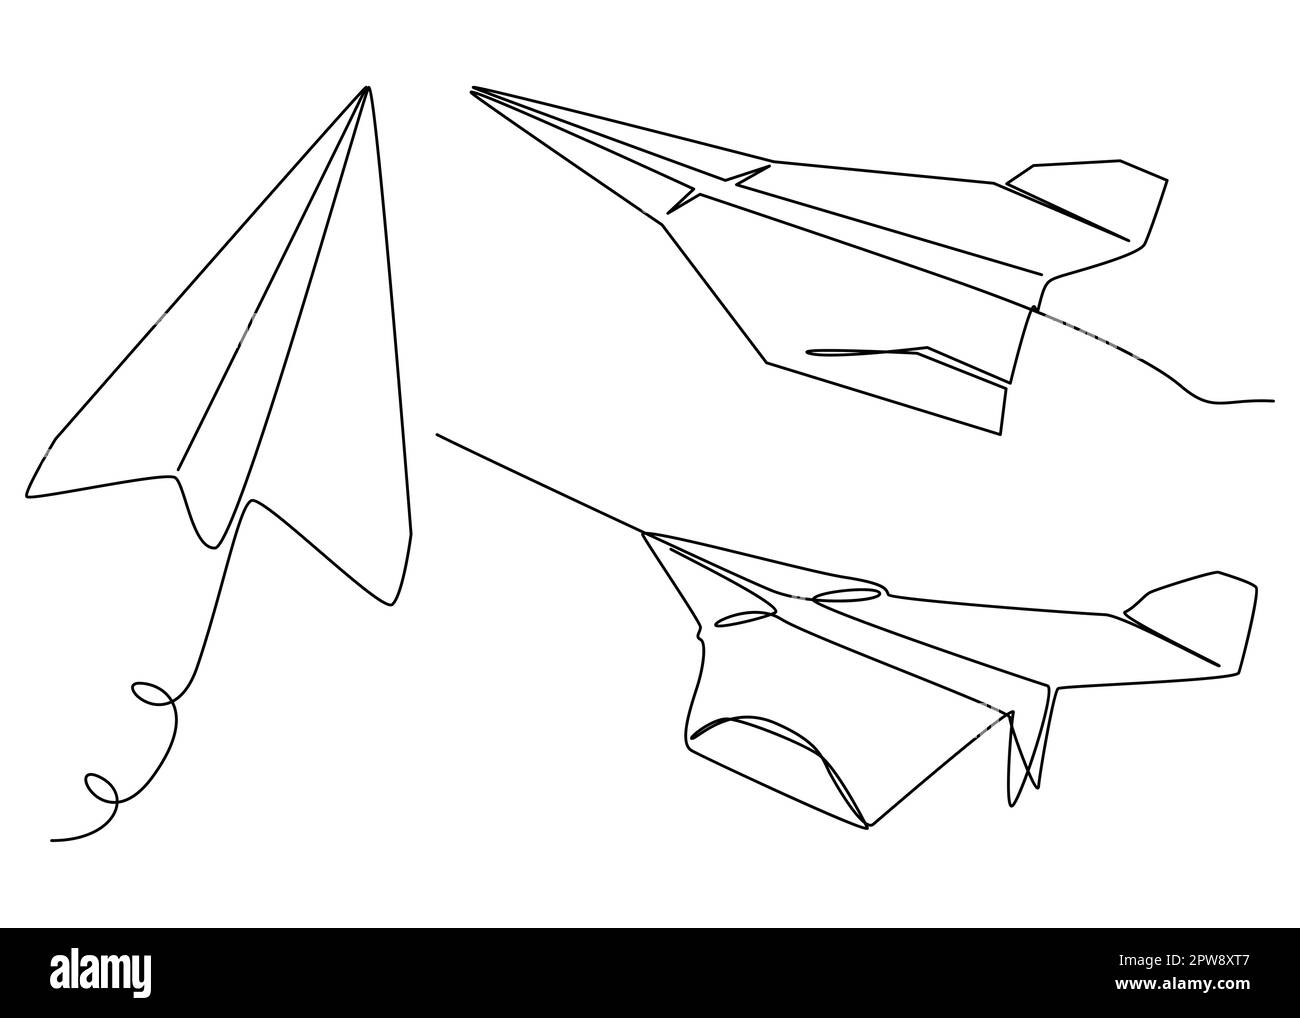 One continuous line of Paper Airplane. Stock Vector